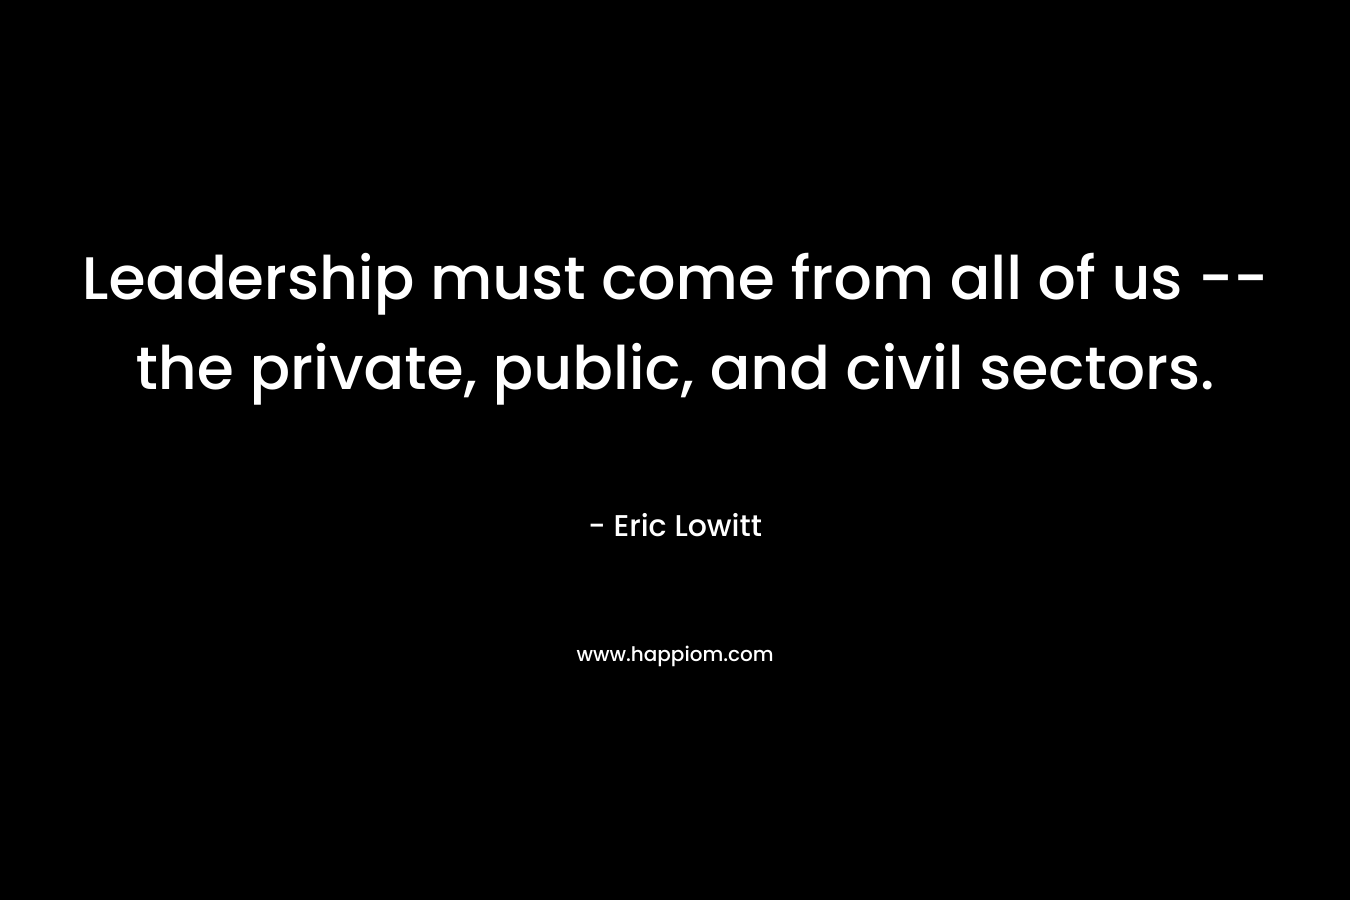 Leadership must come from all of us -- the private, public, and civil sectors.